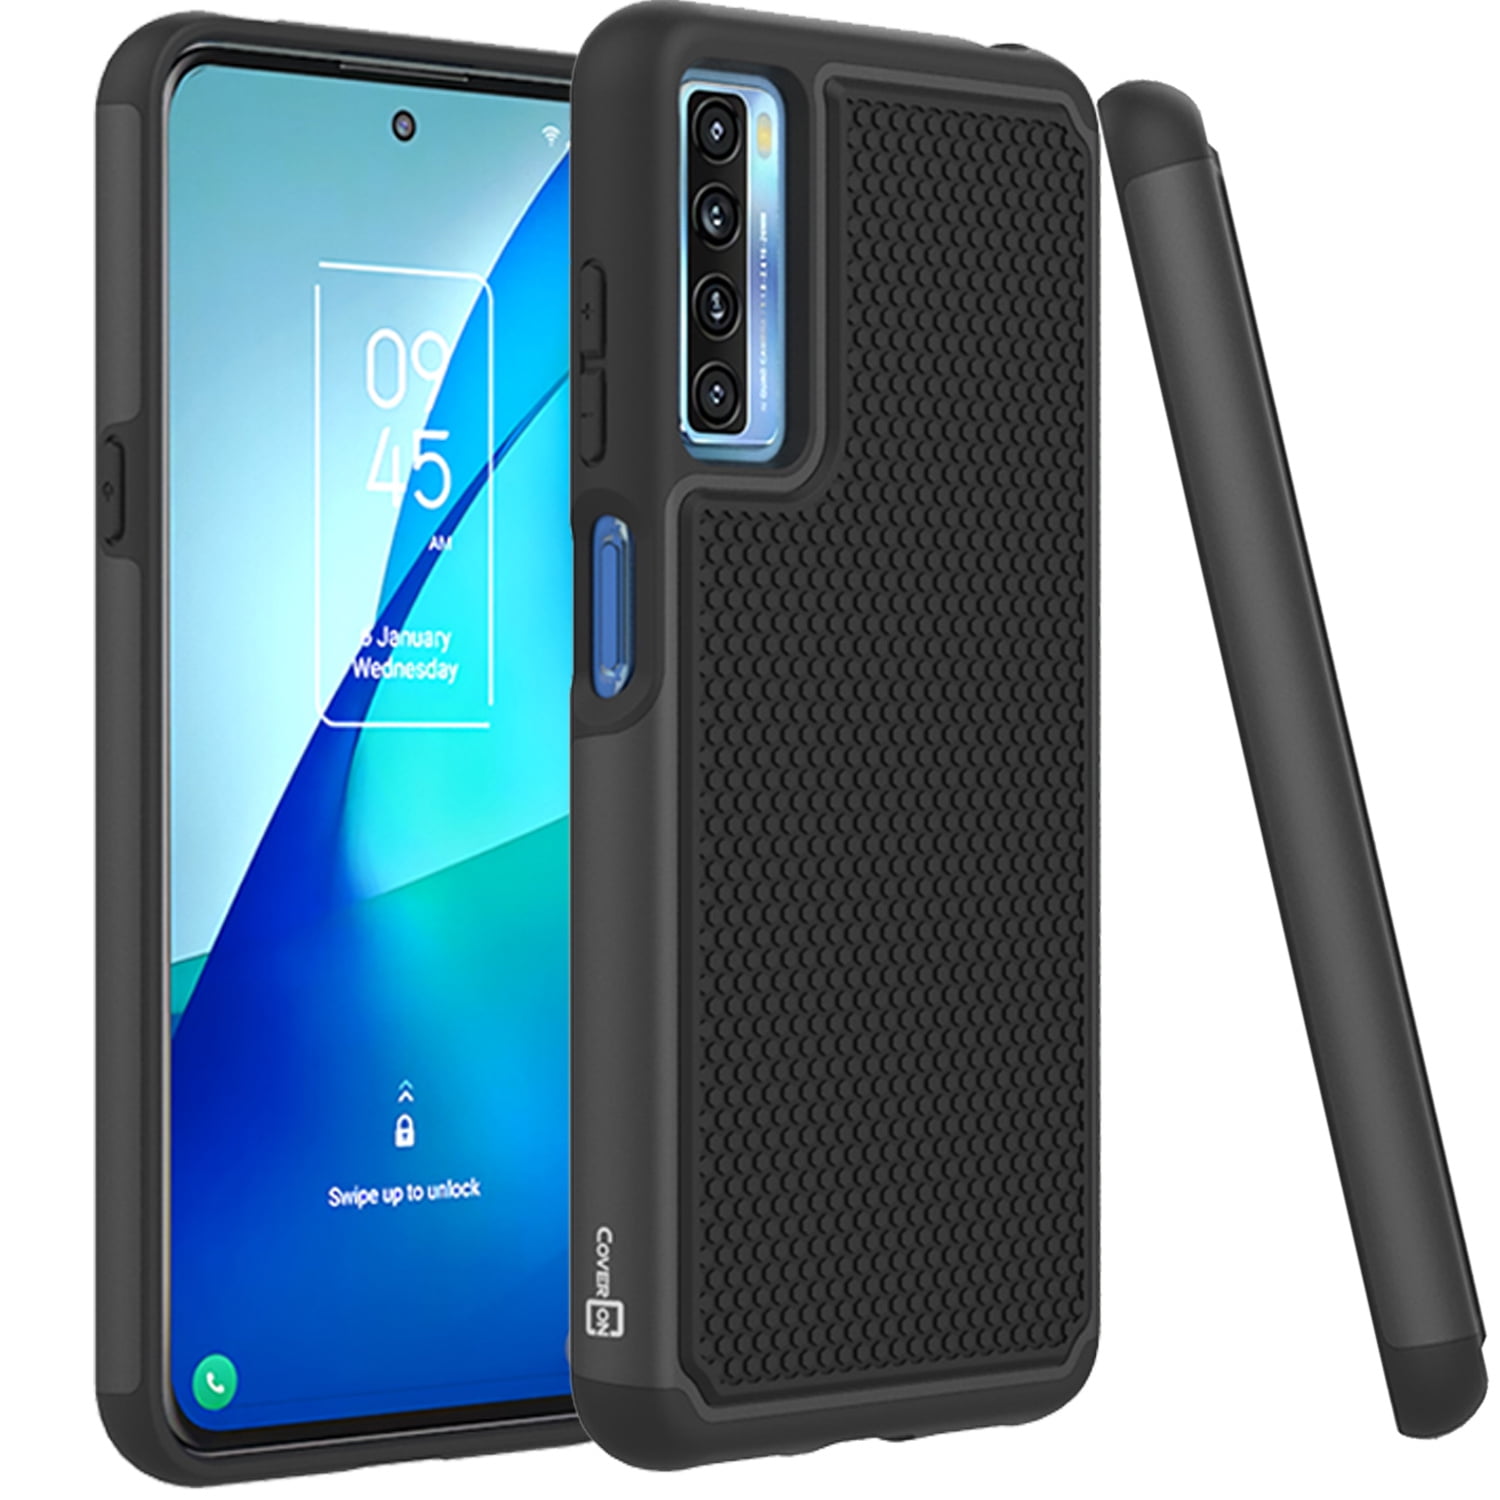 Black Crystal Clear Full Body Scratch-Resistant Shockproof Bumper Rugged Heavy Duty Hybrid Protective Phone Cover for TCL 20 Pro 5G TCL 20 Pro 5G Case 